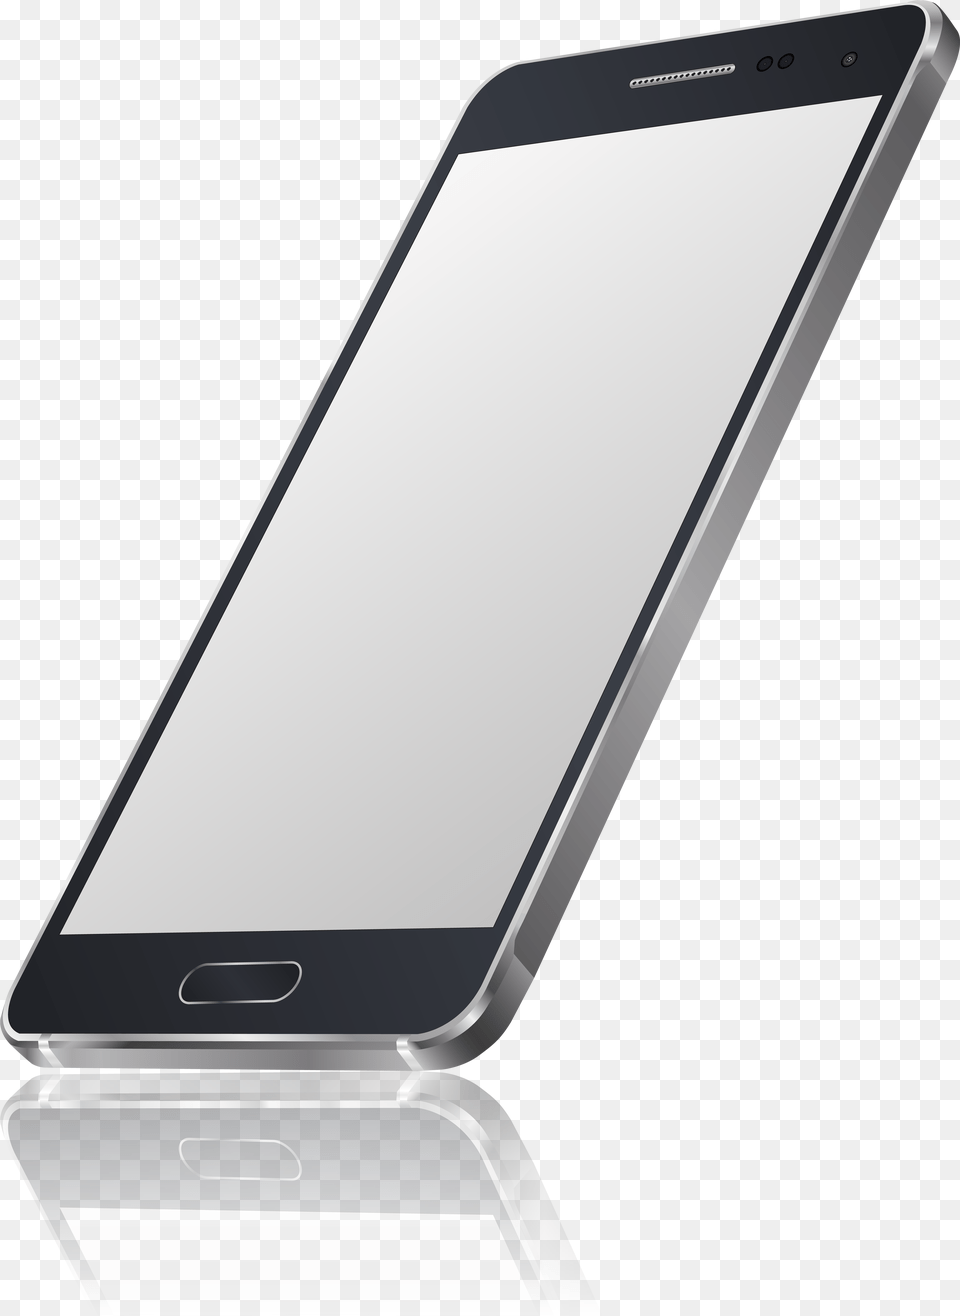 Smartphone Clip Art Image Smartphone, Electronics, Mobile Phone, Phone, Iphone Free Transparent Png